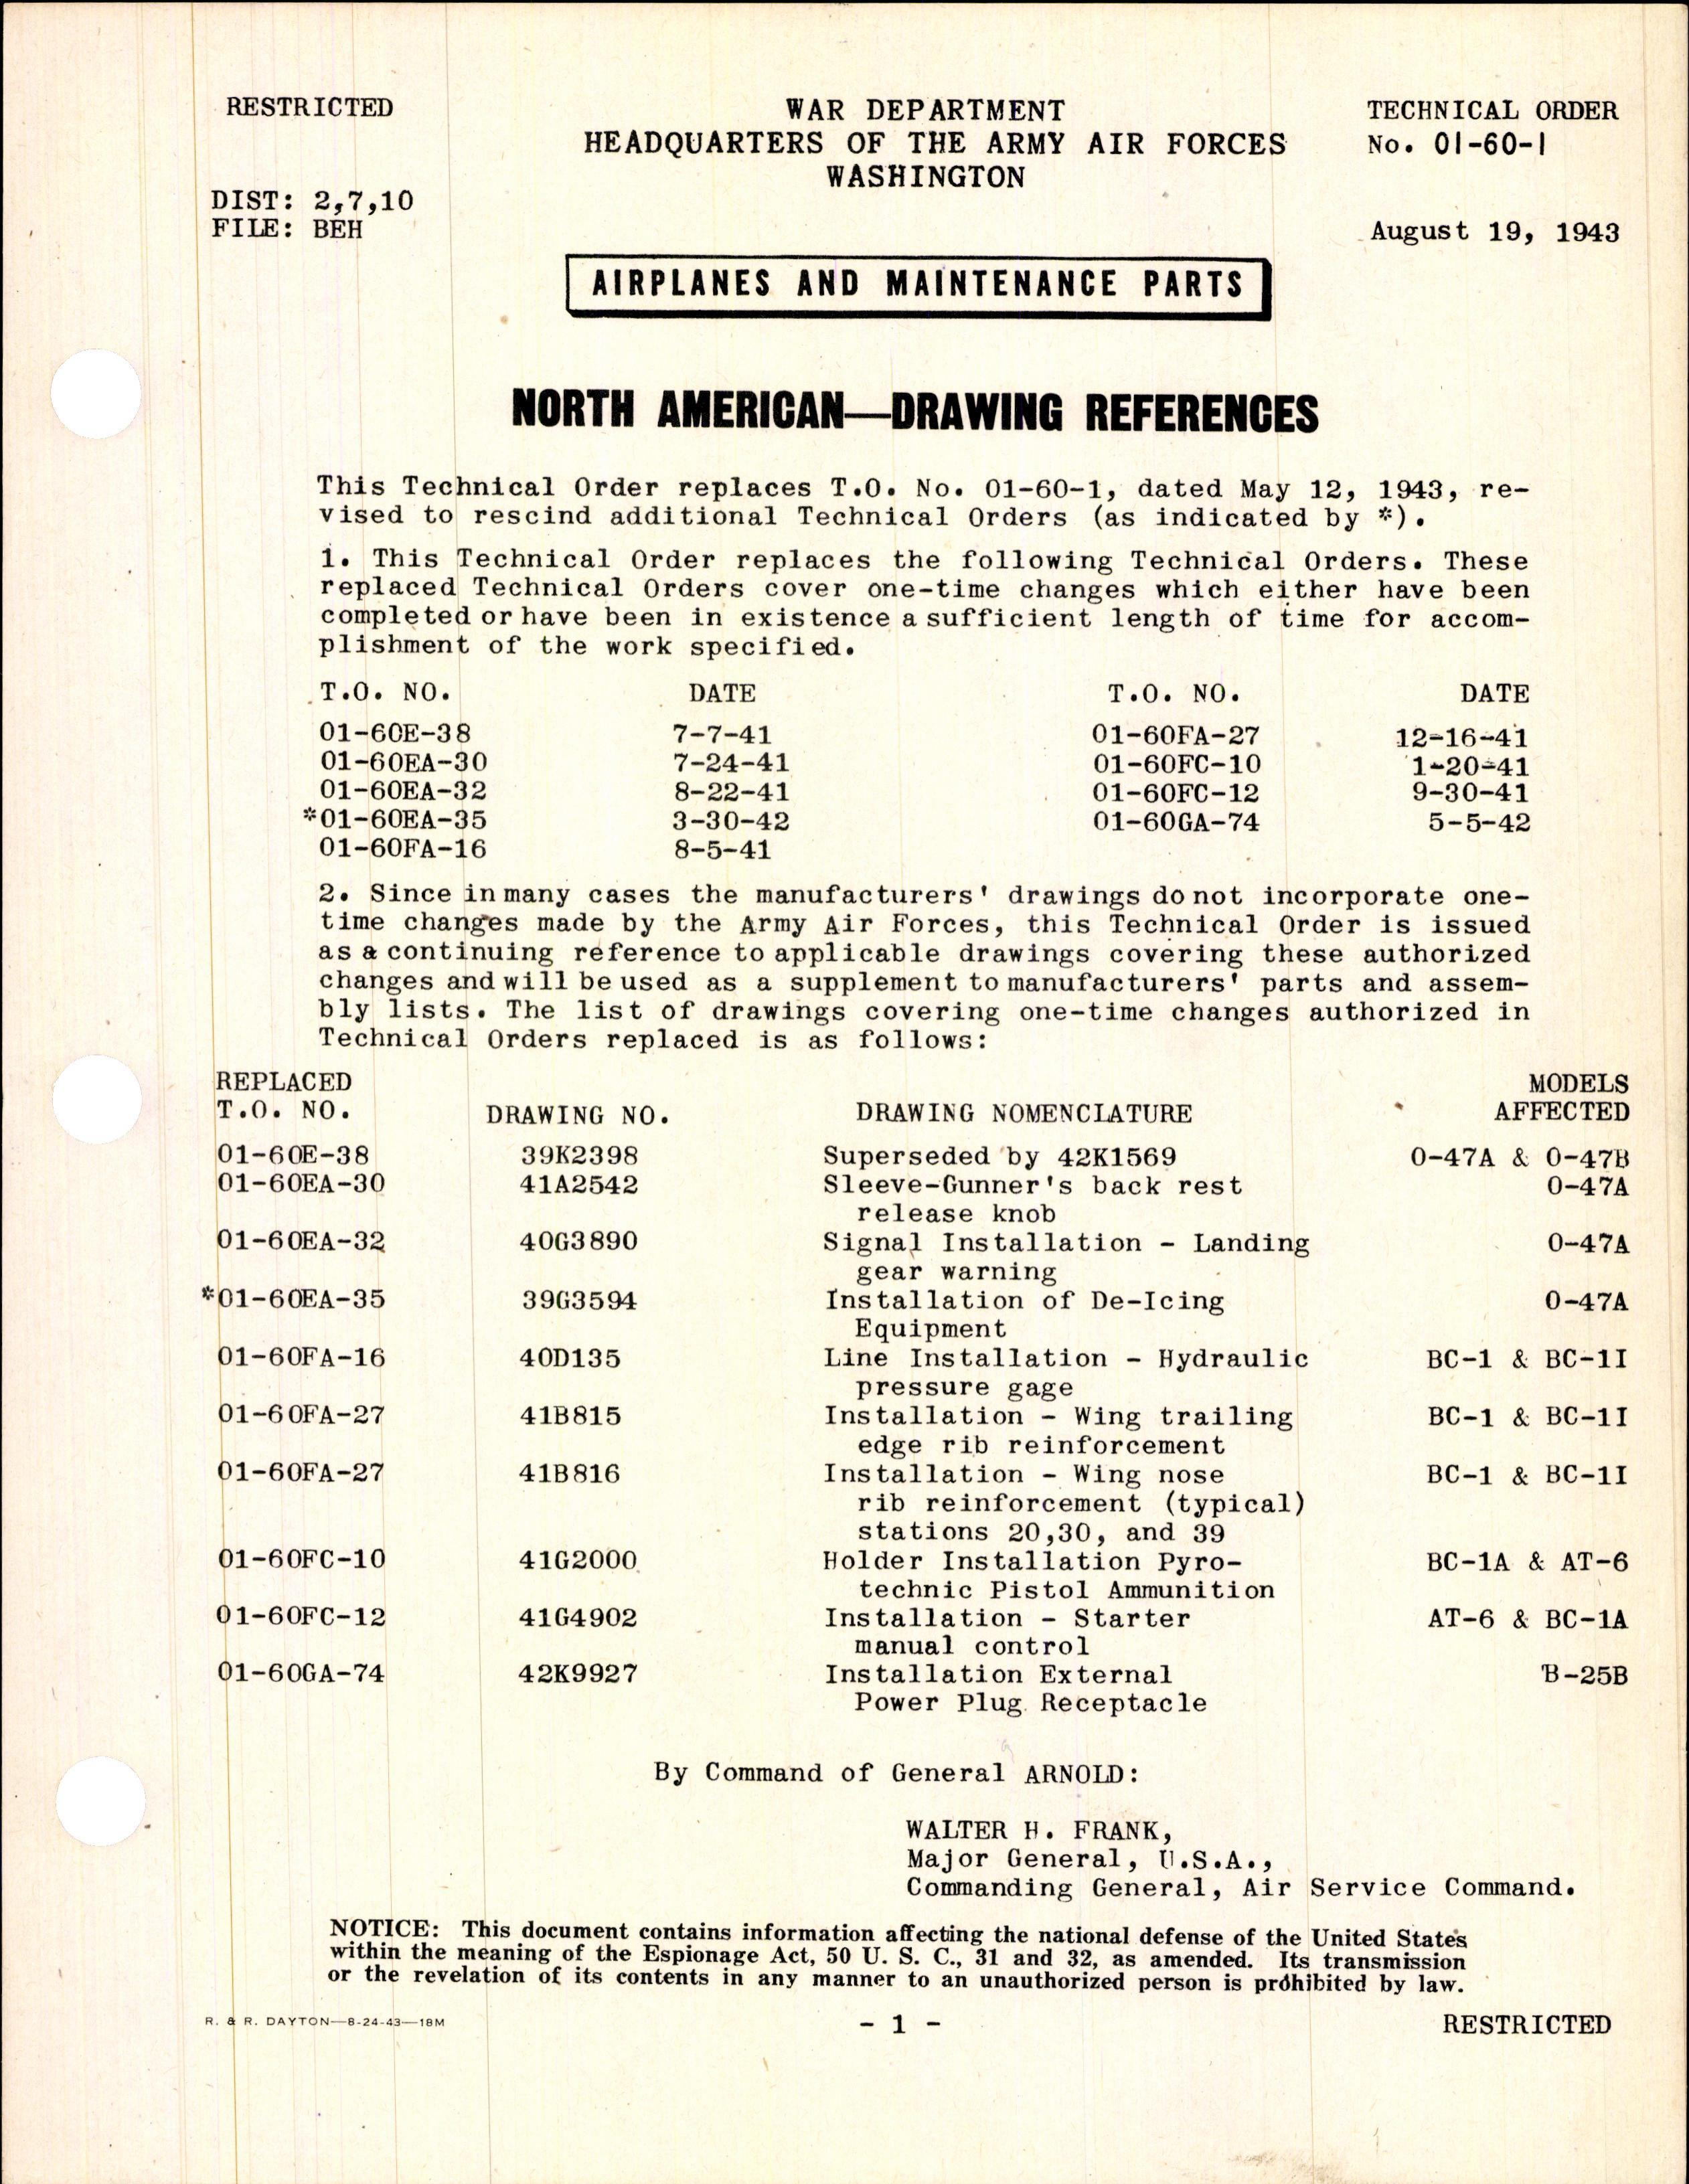 Sample page 1 from AirCorps Library document: Airplane and Maintenance Parts - Drawing References